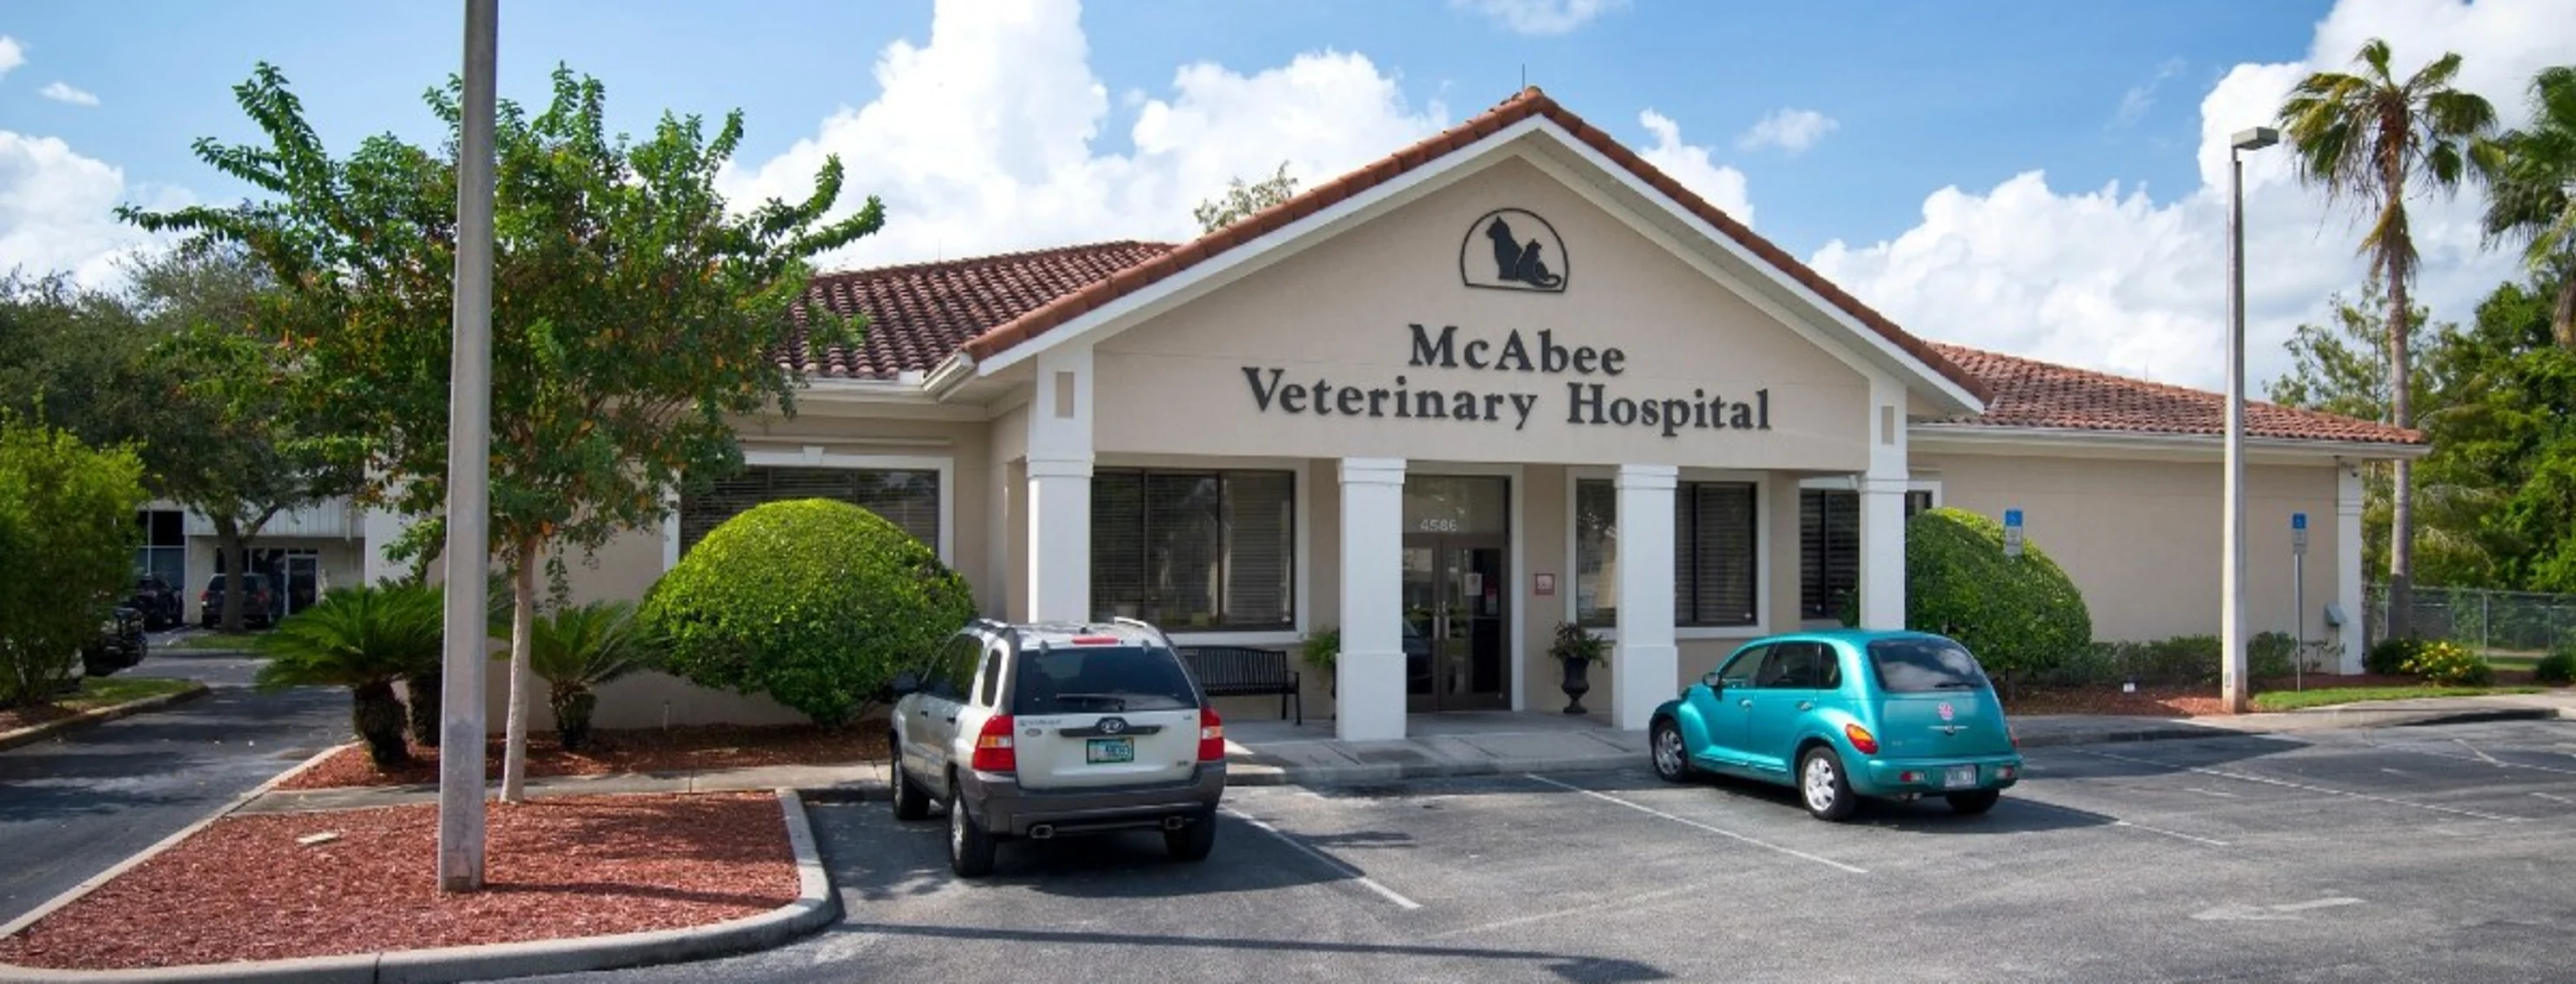 Exterior and entrance of McAbee Veterinary Hospital